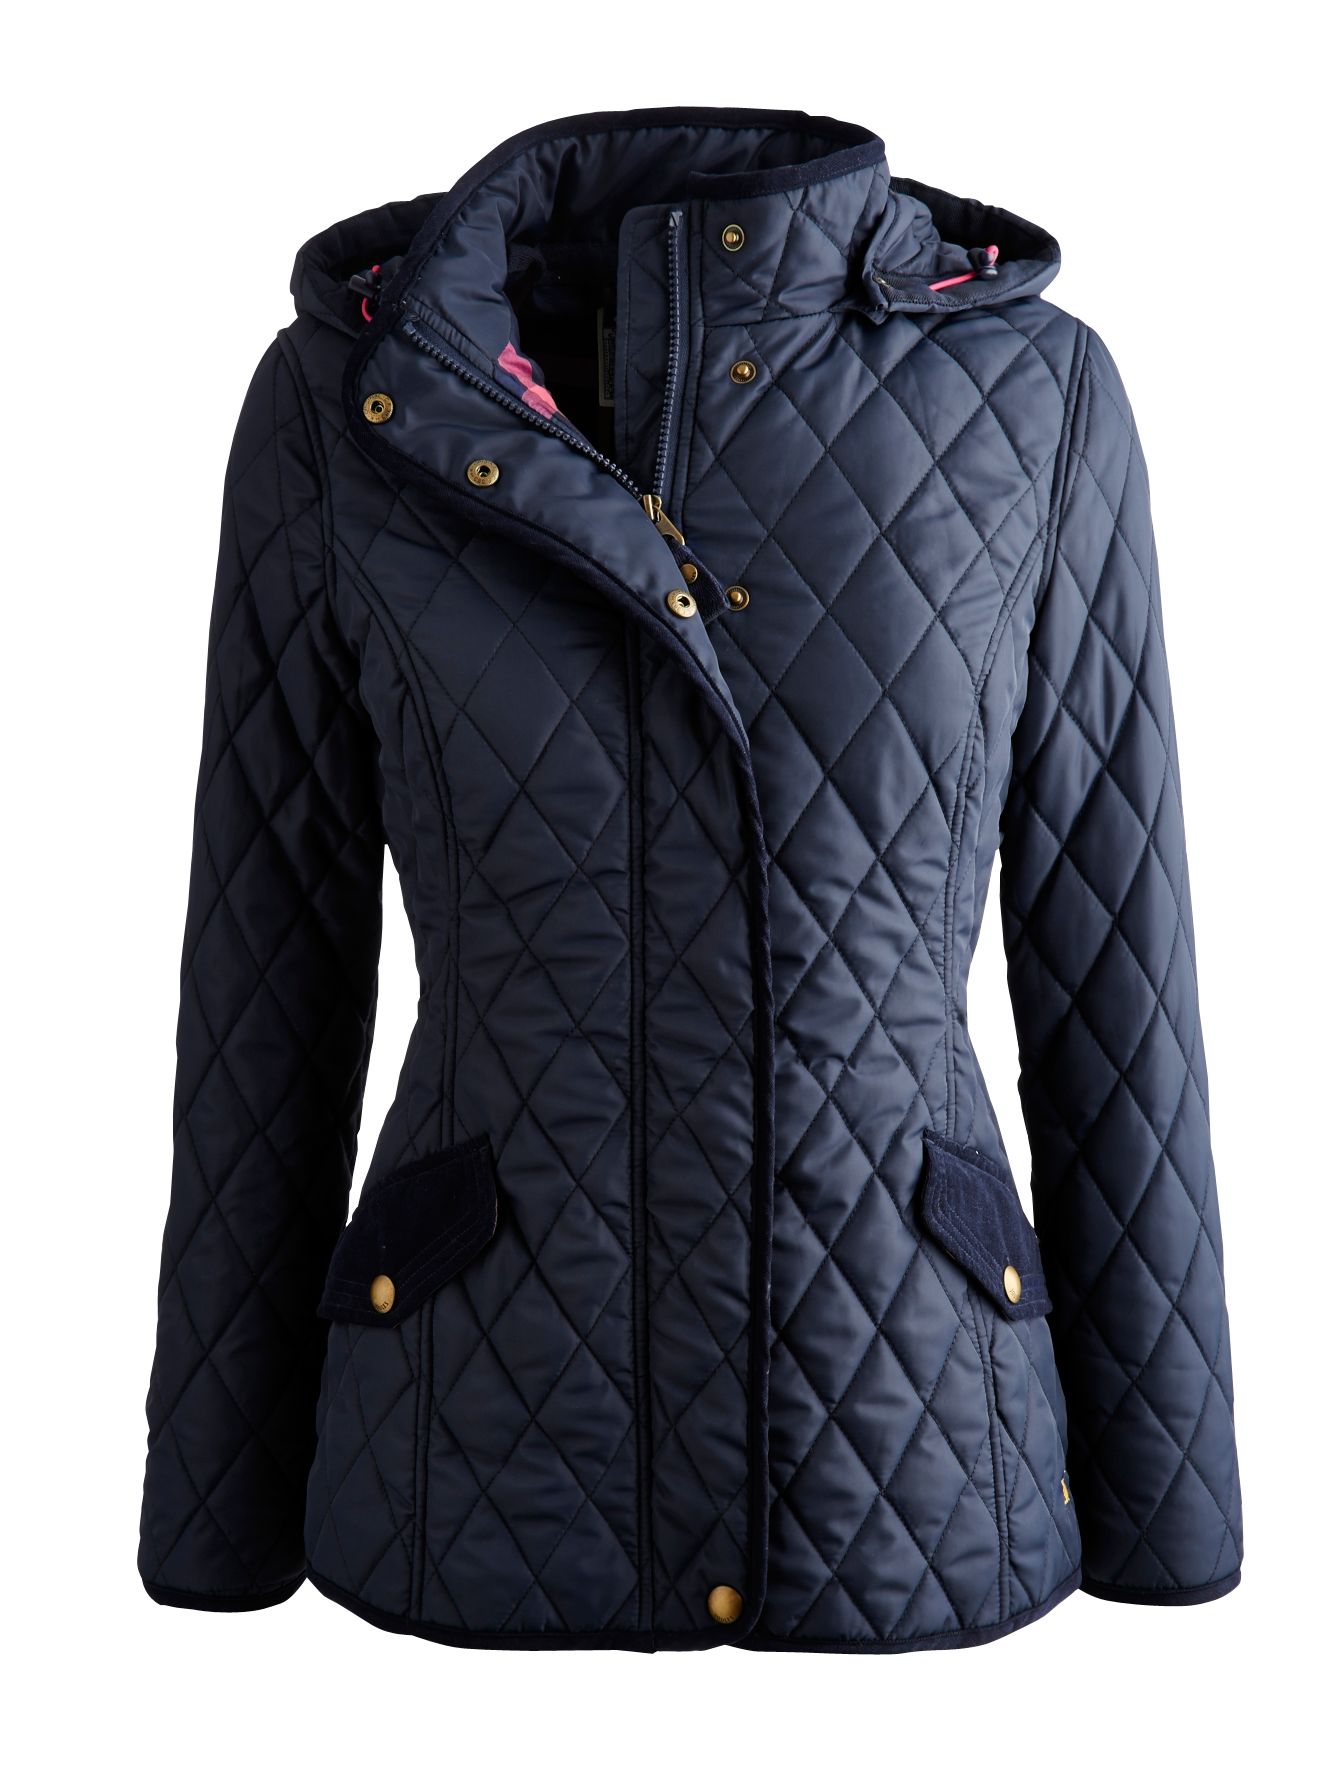 Joules Marcotte Hood Quilted Jacket, Marine Navy at John Lewis & Partners